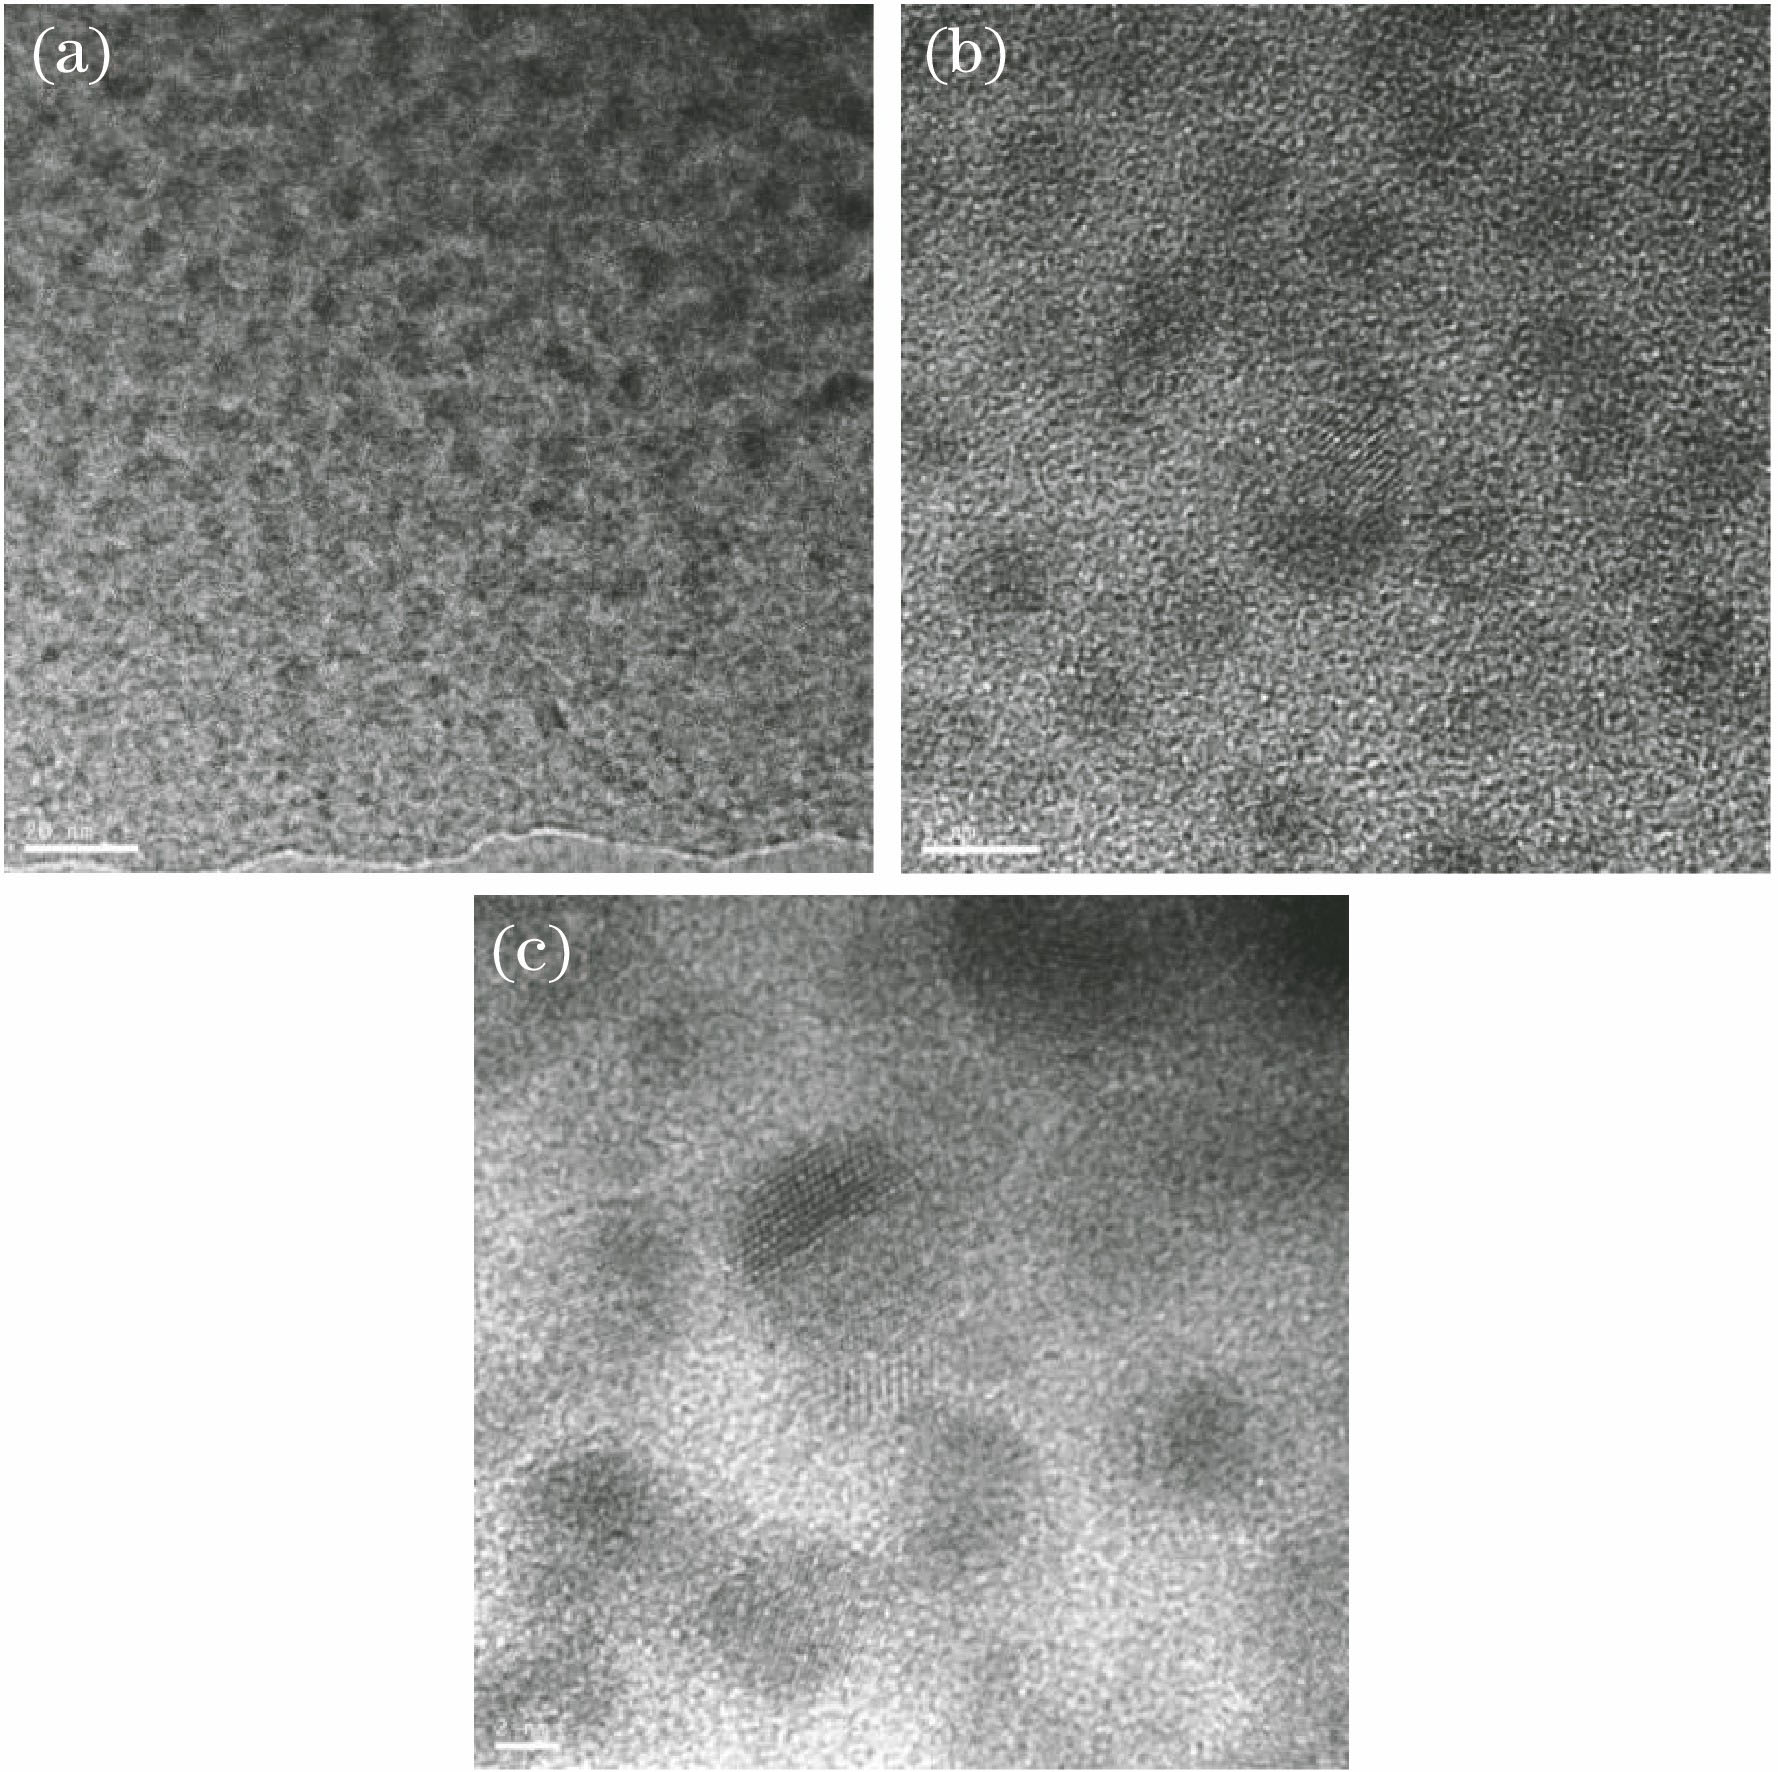 TEM images of PbSe quantum dot doped glass fiber under different scales. (a) 20 nm; (b) 5 nm; (c) 2 nm